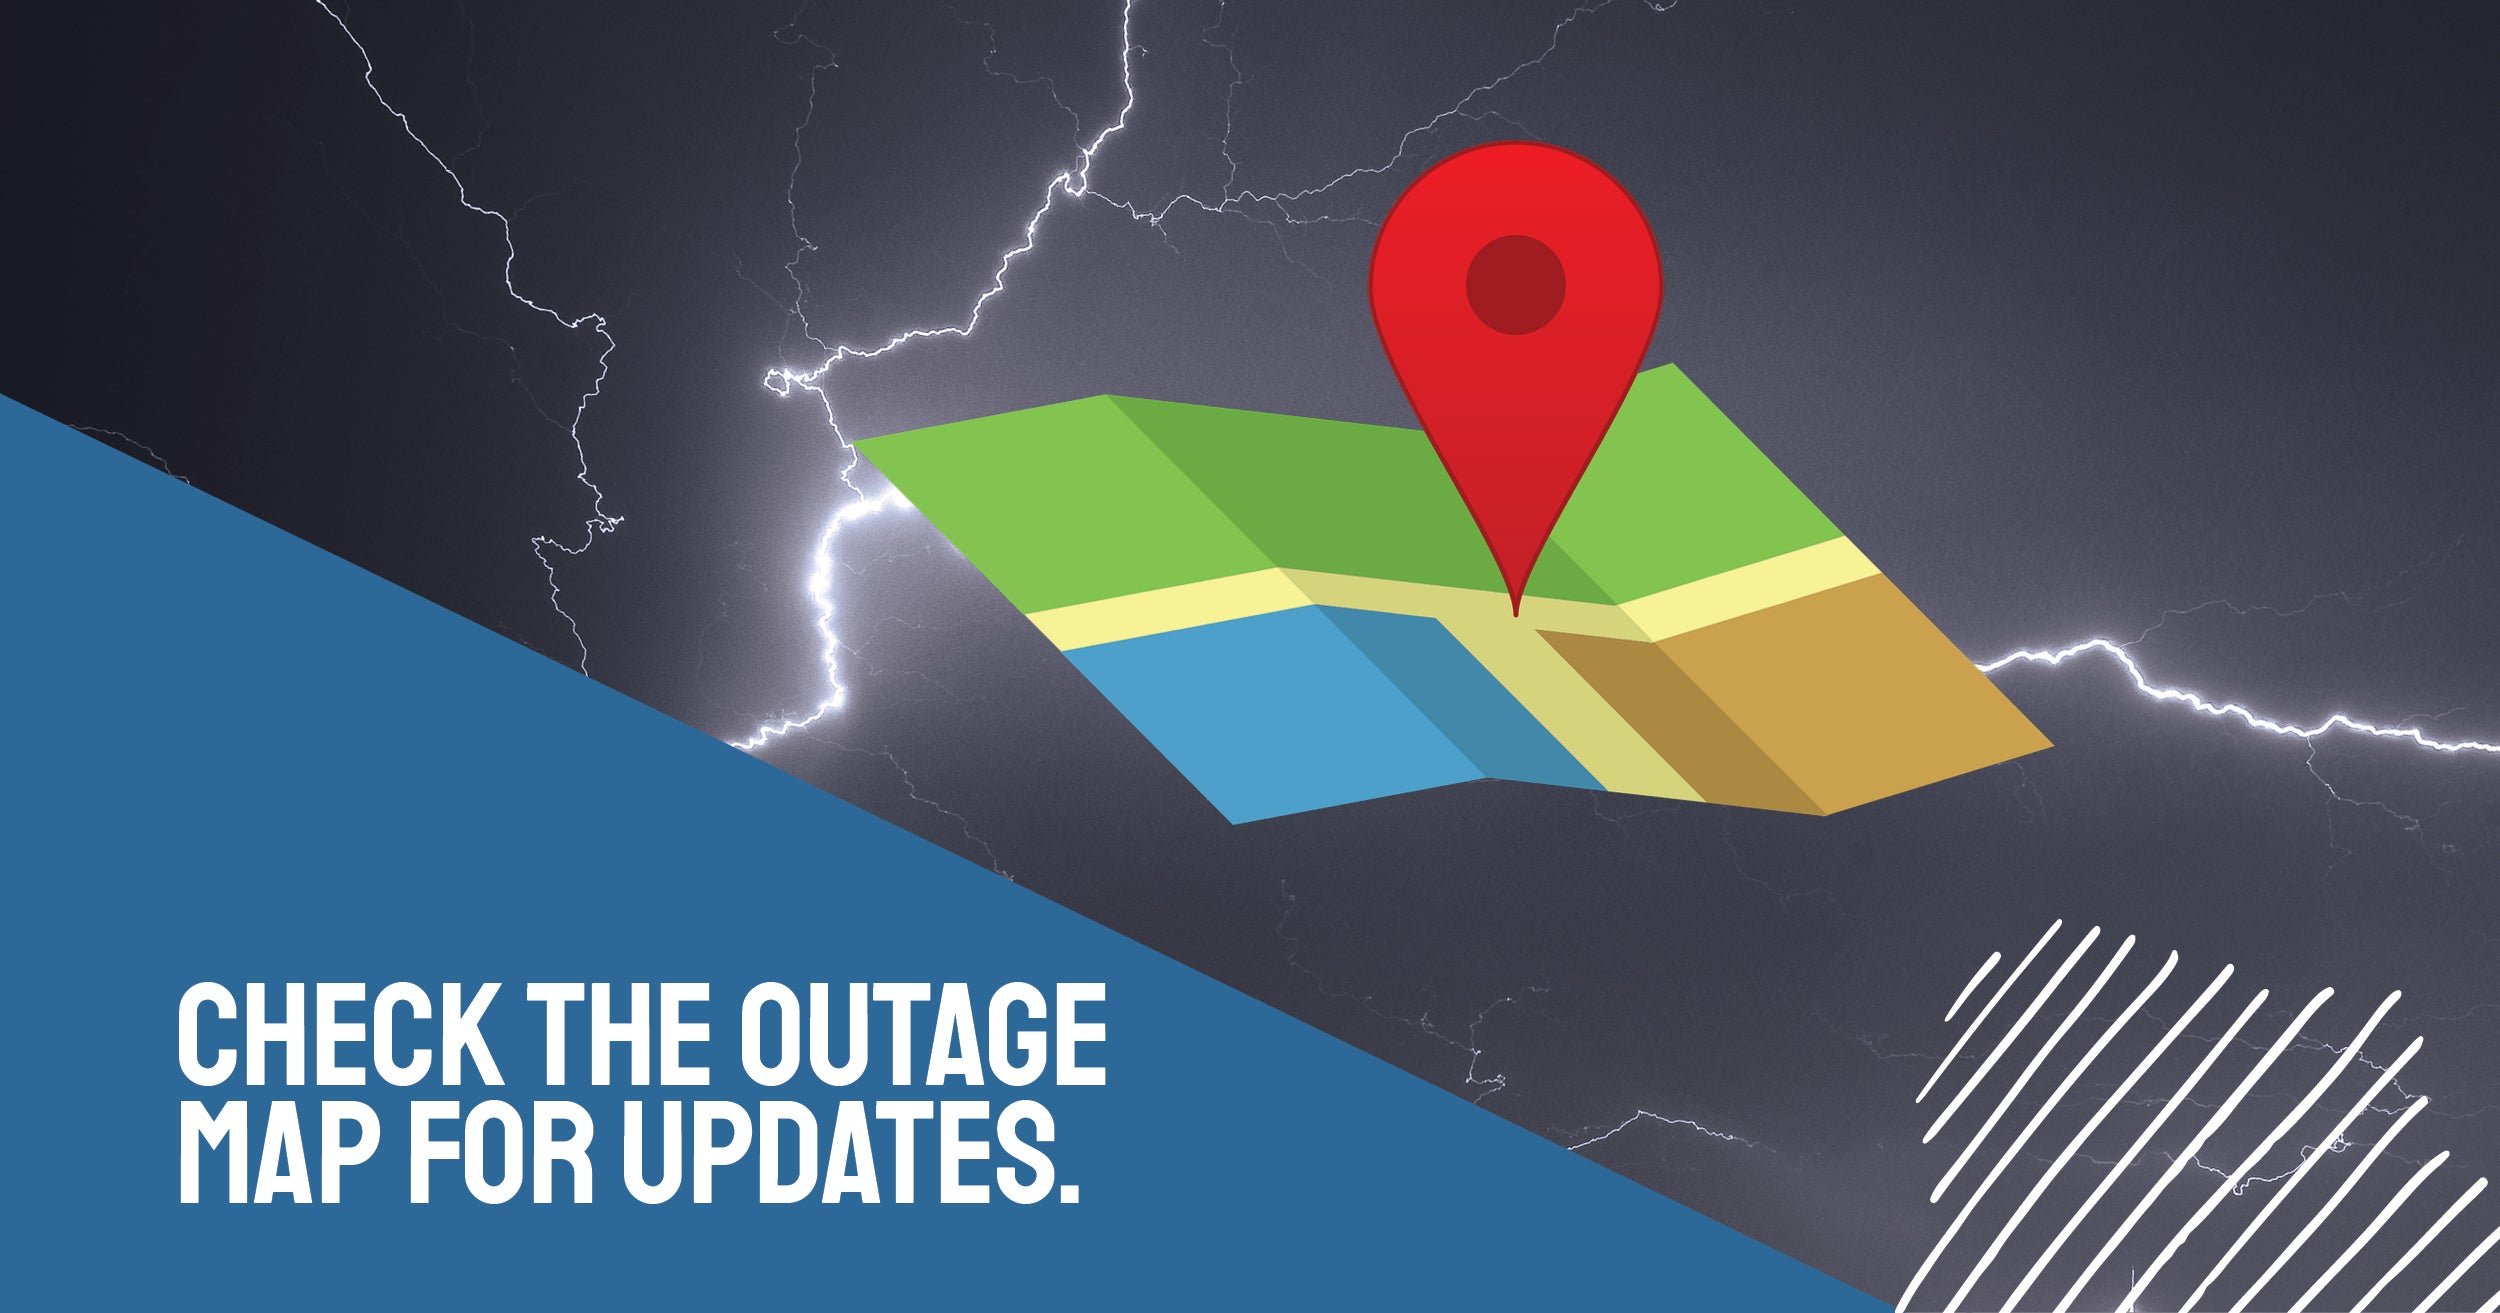 Check the outage map